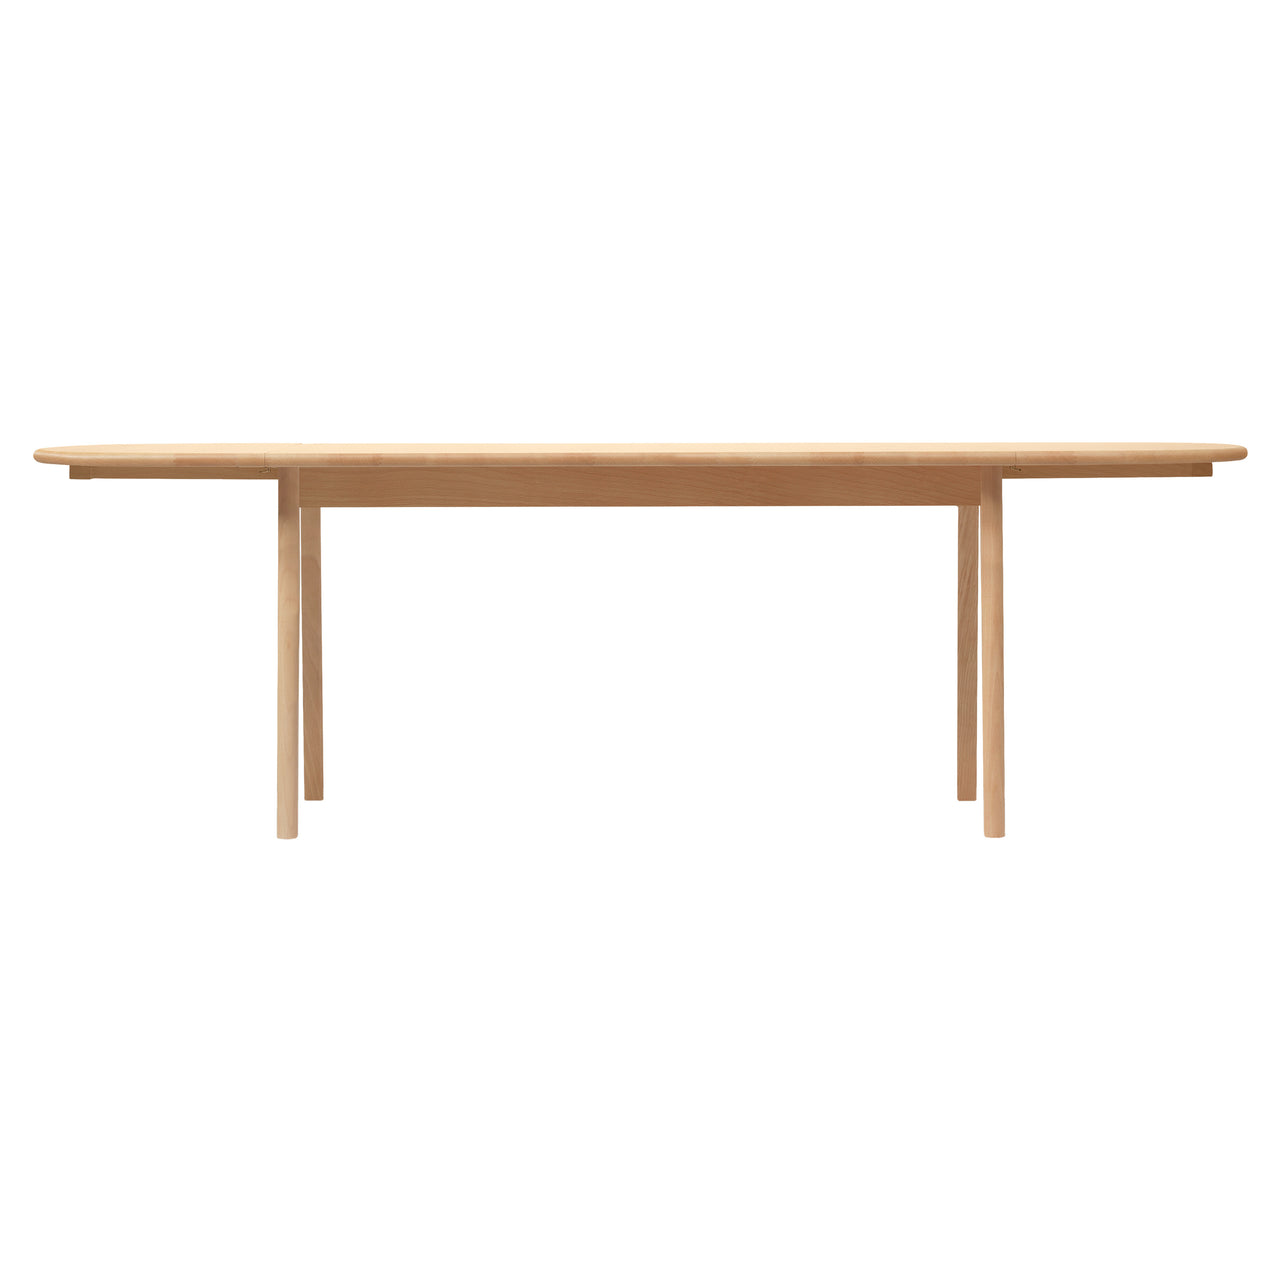 CH006 Dining Table: Oiled Beech